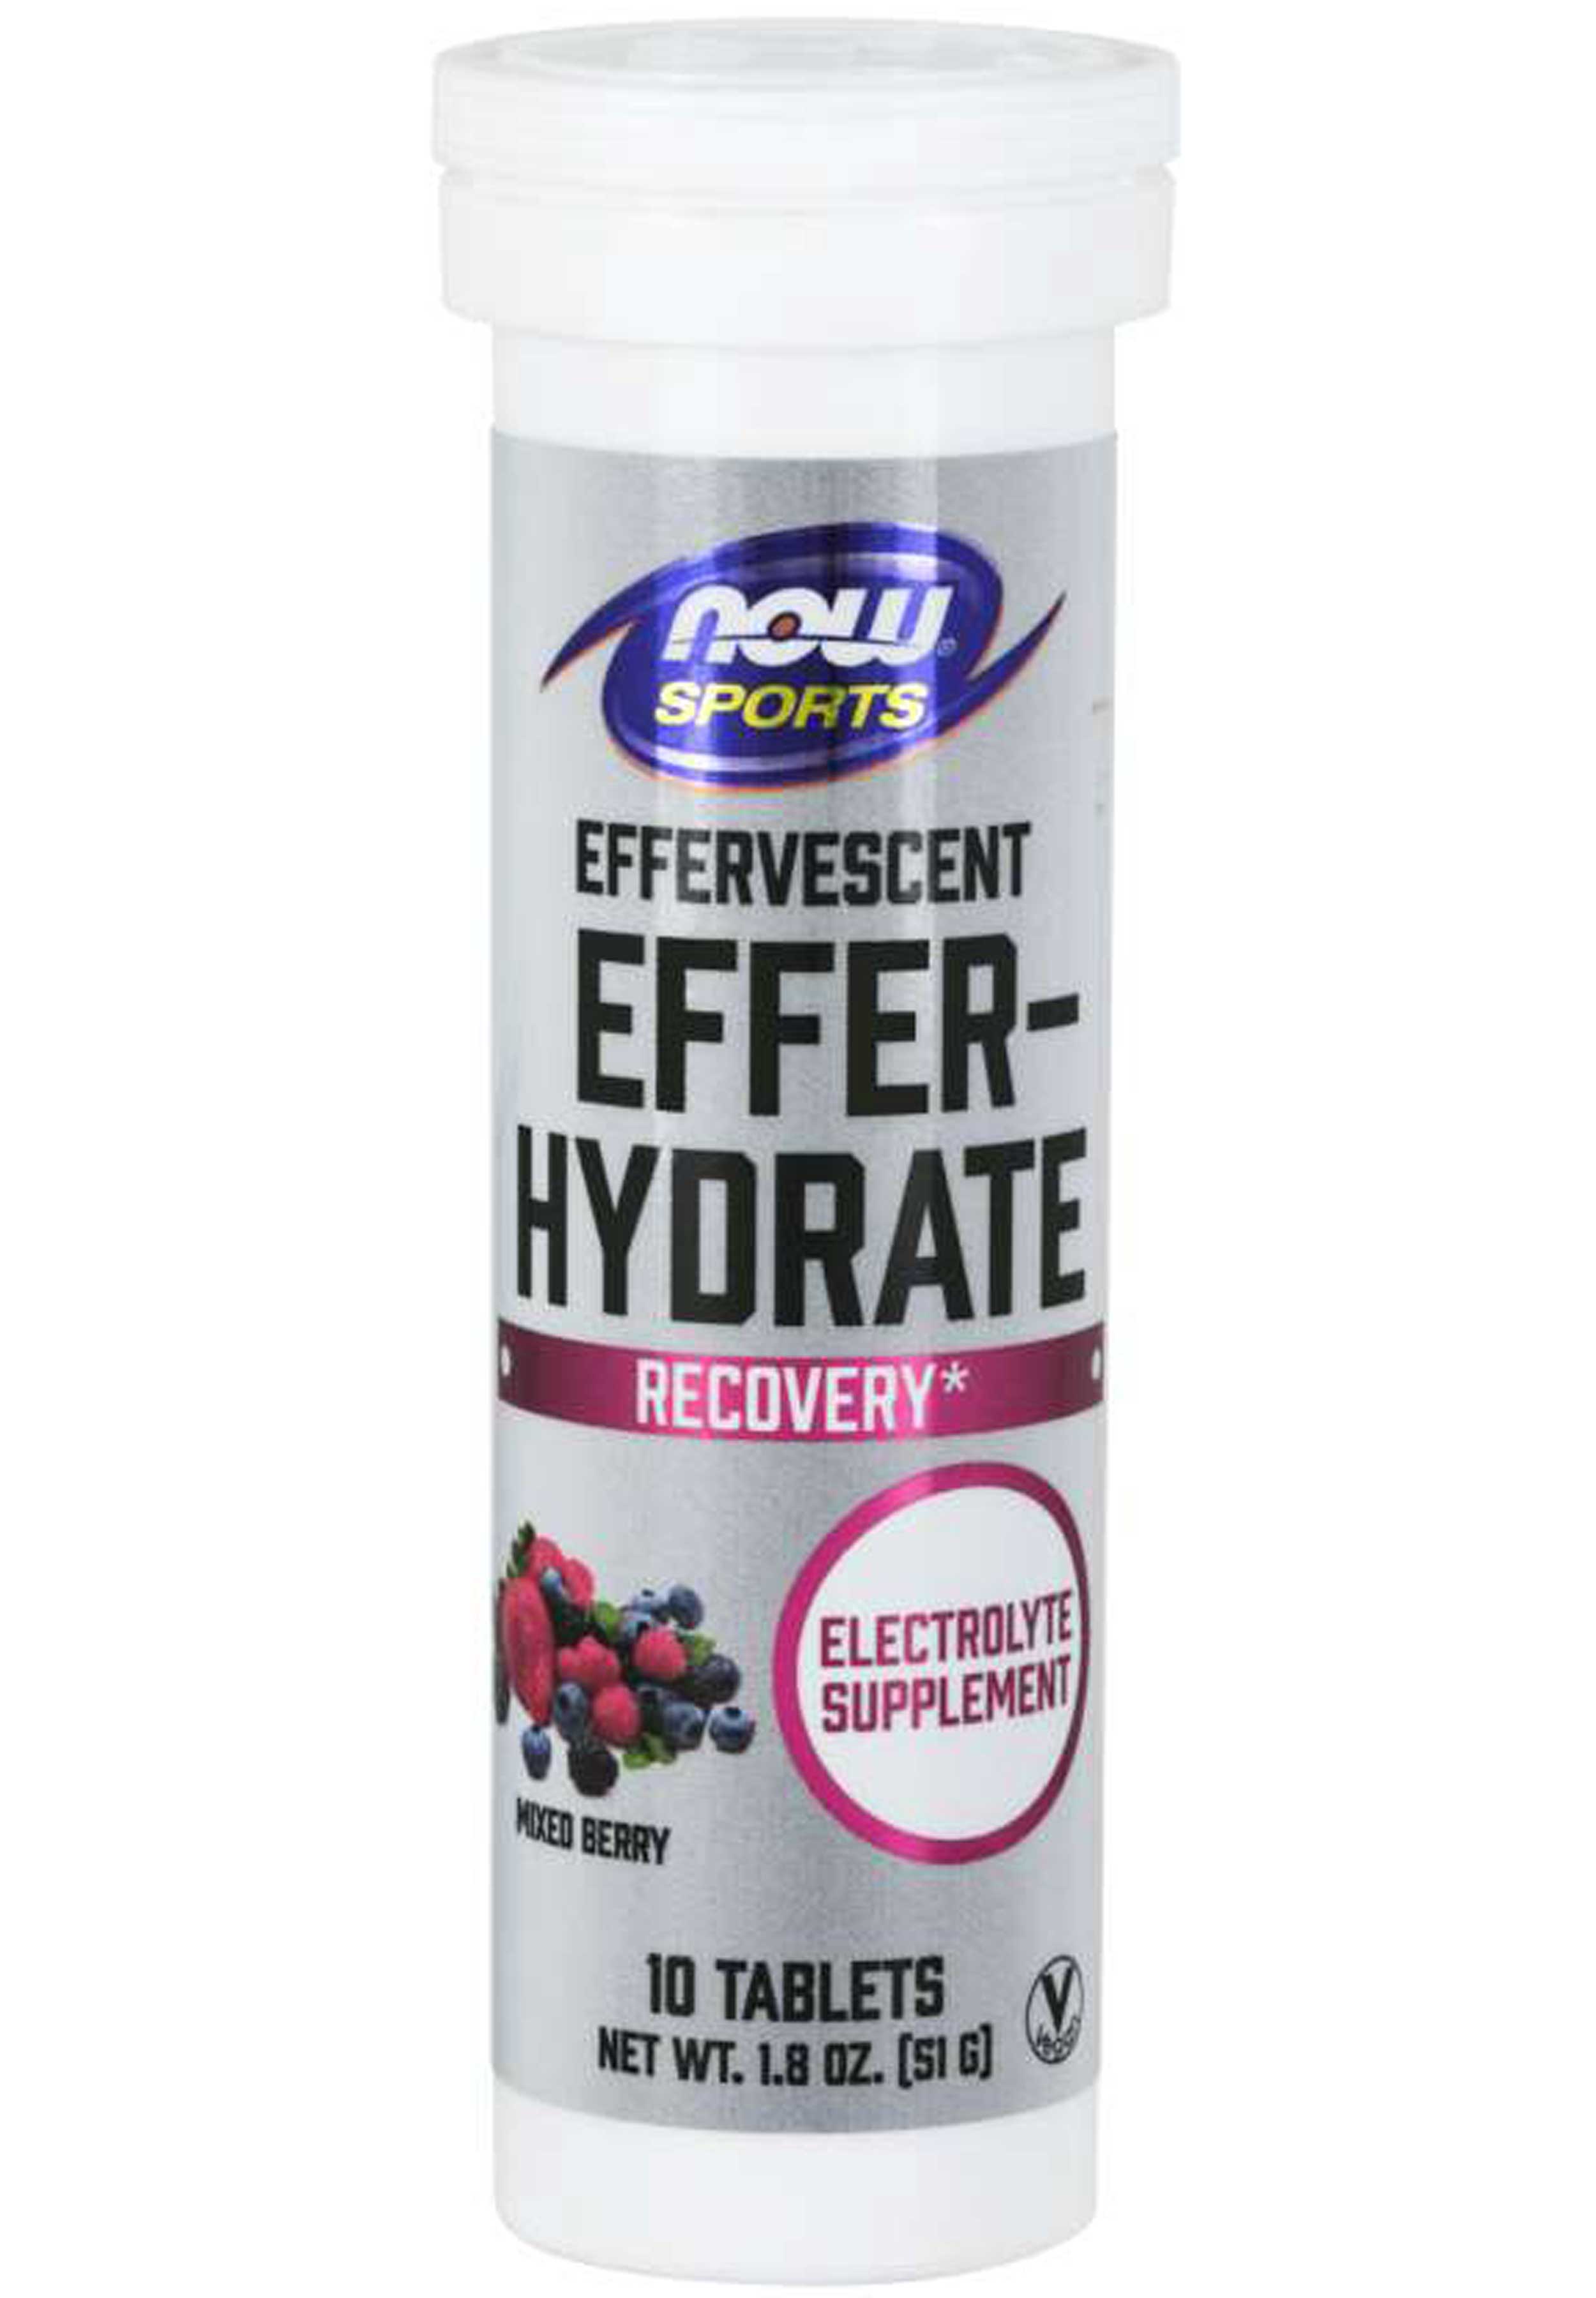 NOW Effer-Hydrate, Mixed Berry